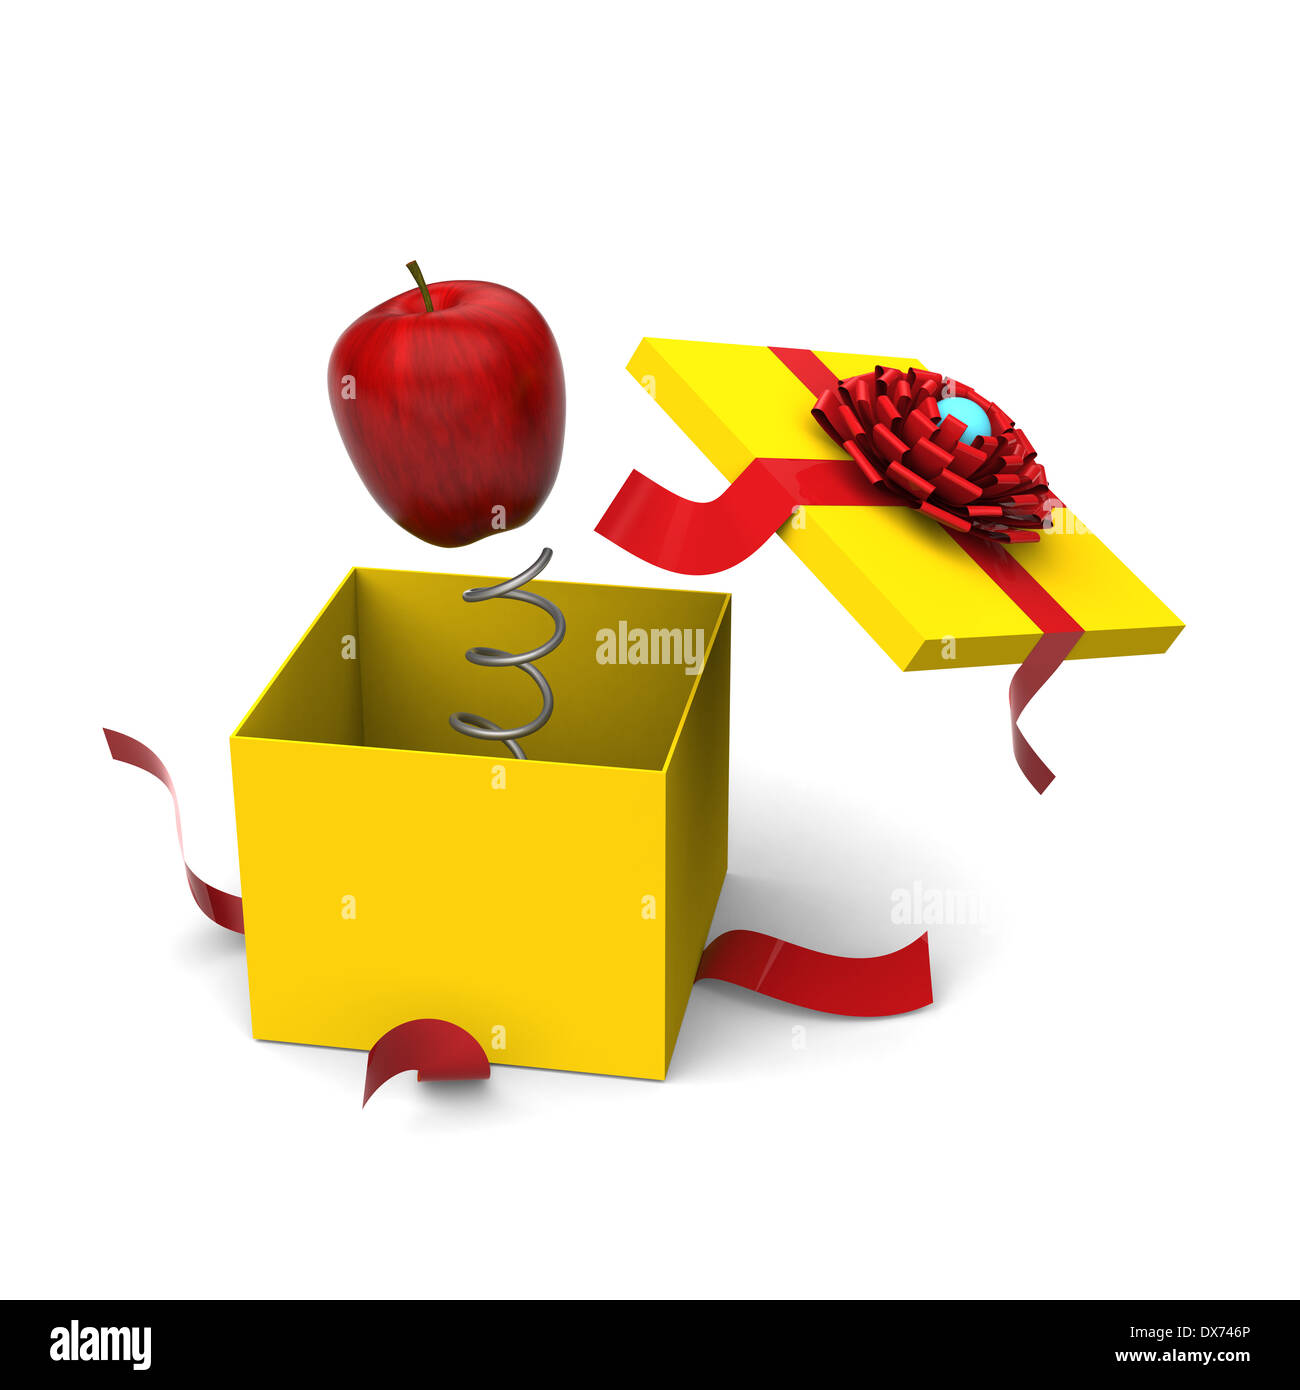 3D model of red apple springing out from a yellow gift box Stock Photo